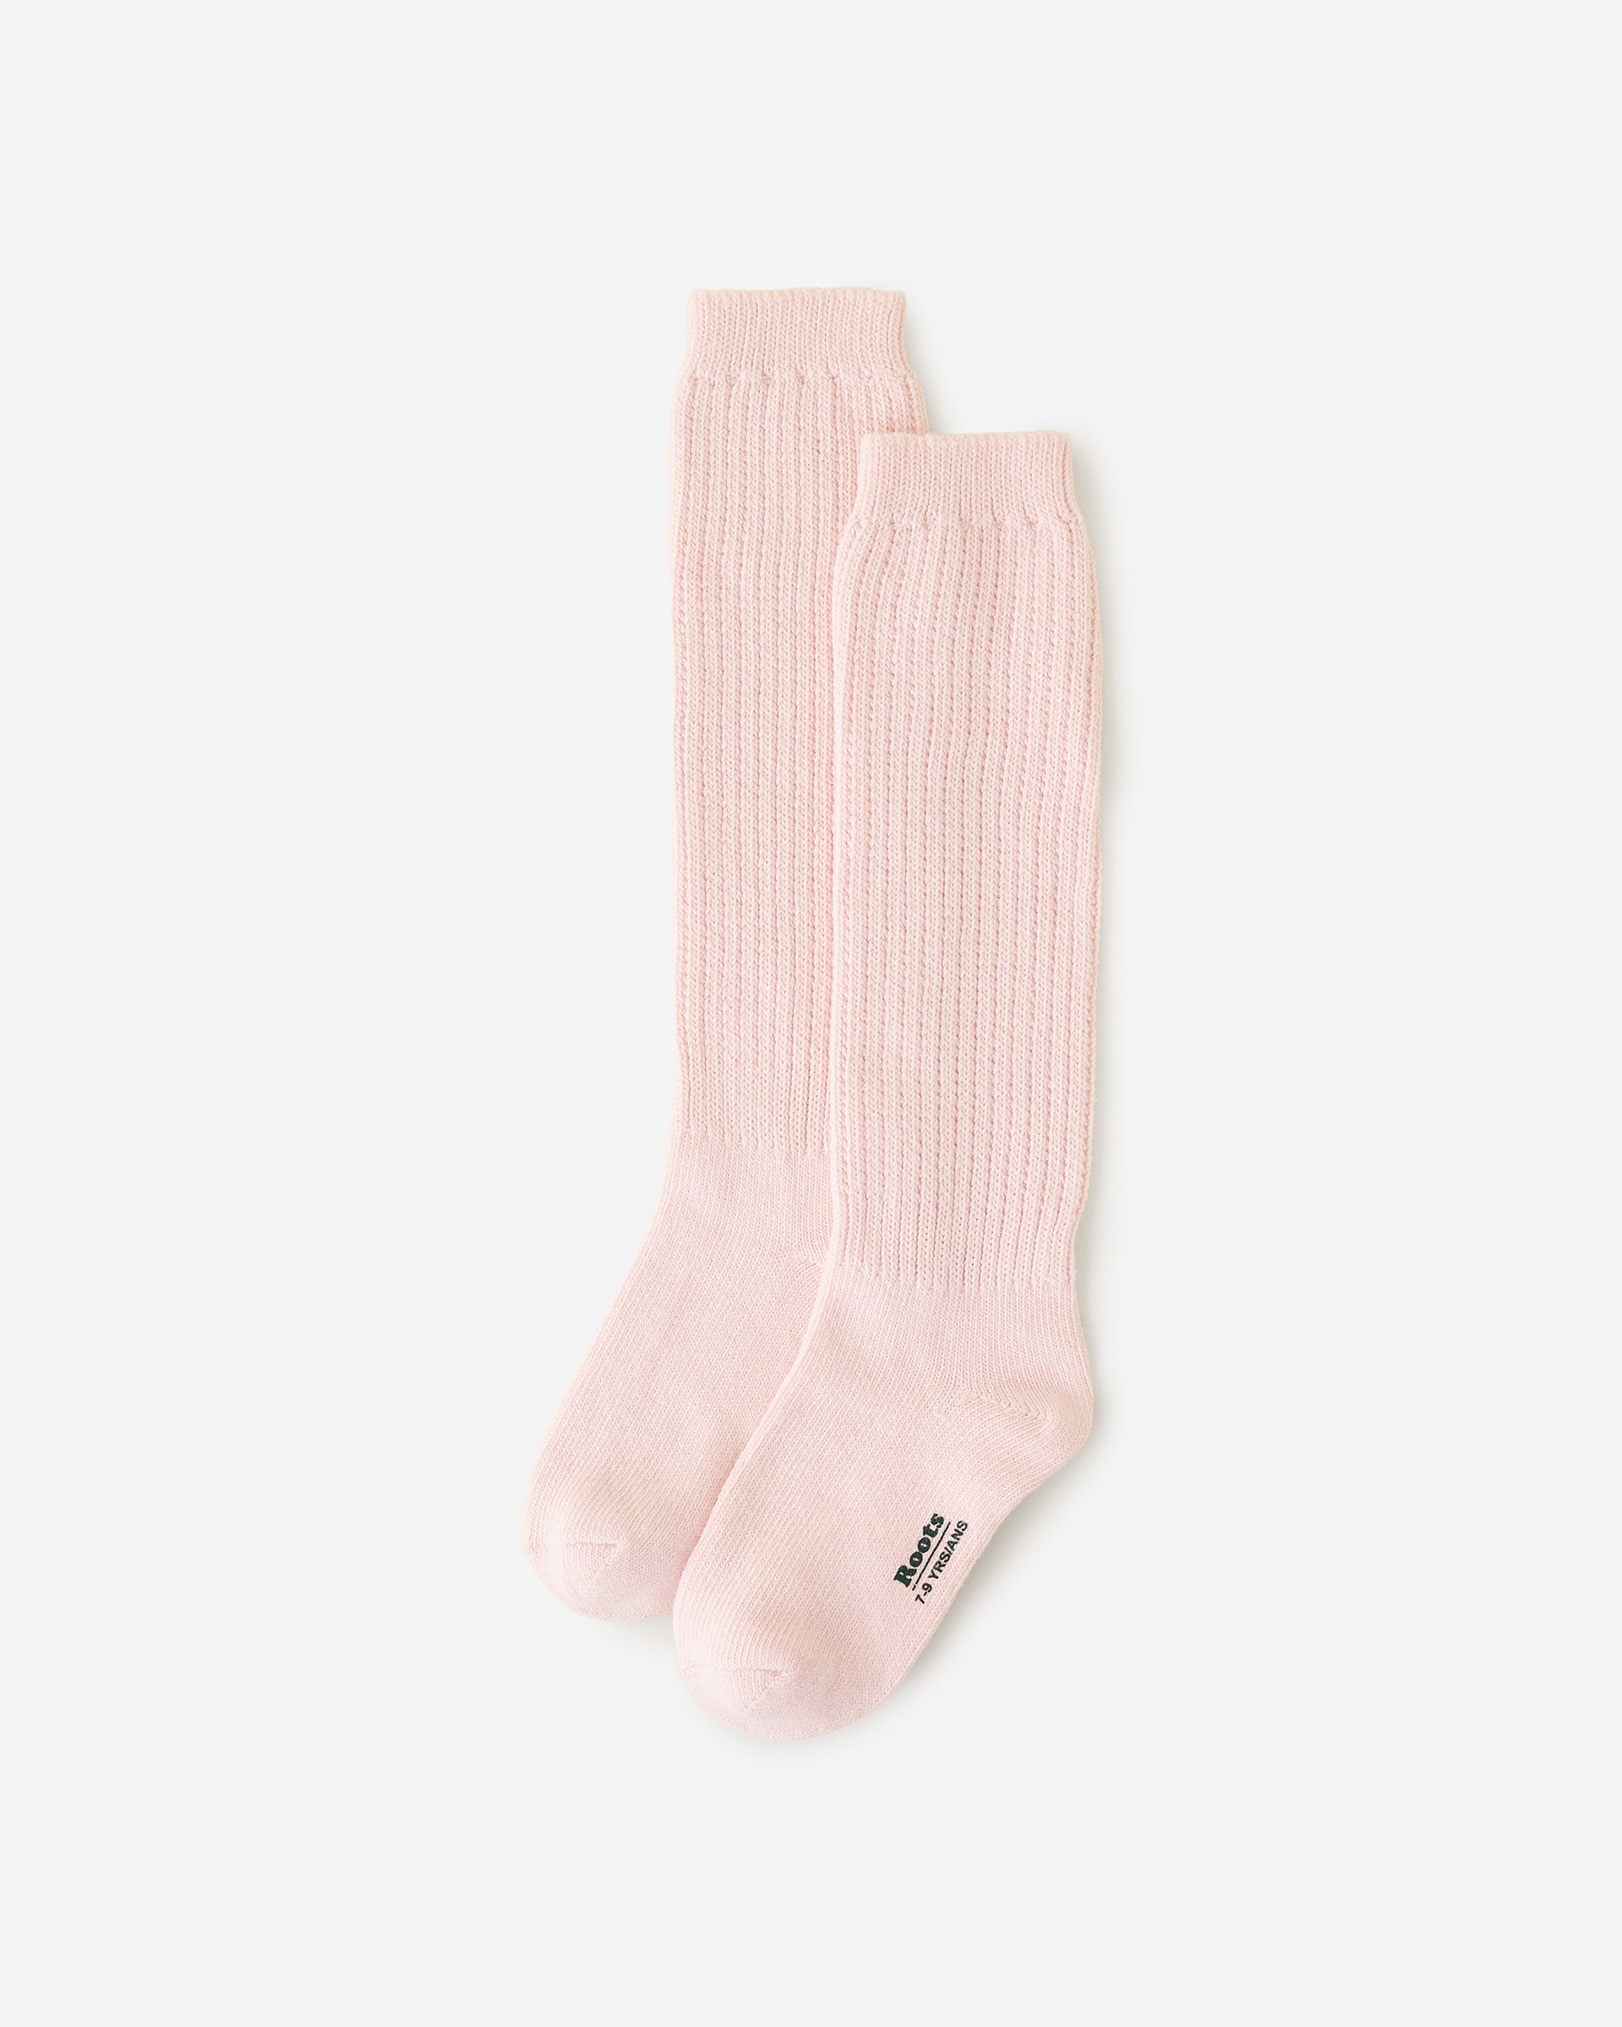 Roots Kid Warm-Up Sock in Pearl Pink